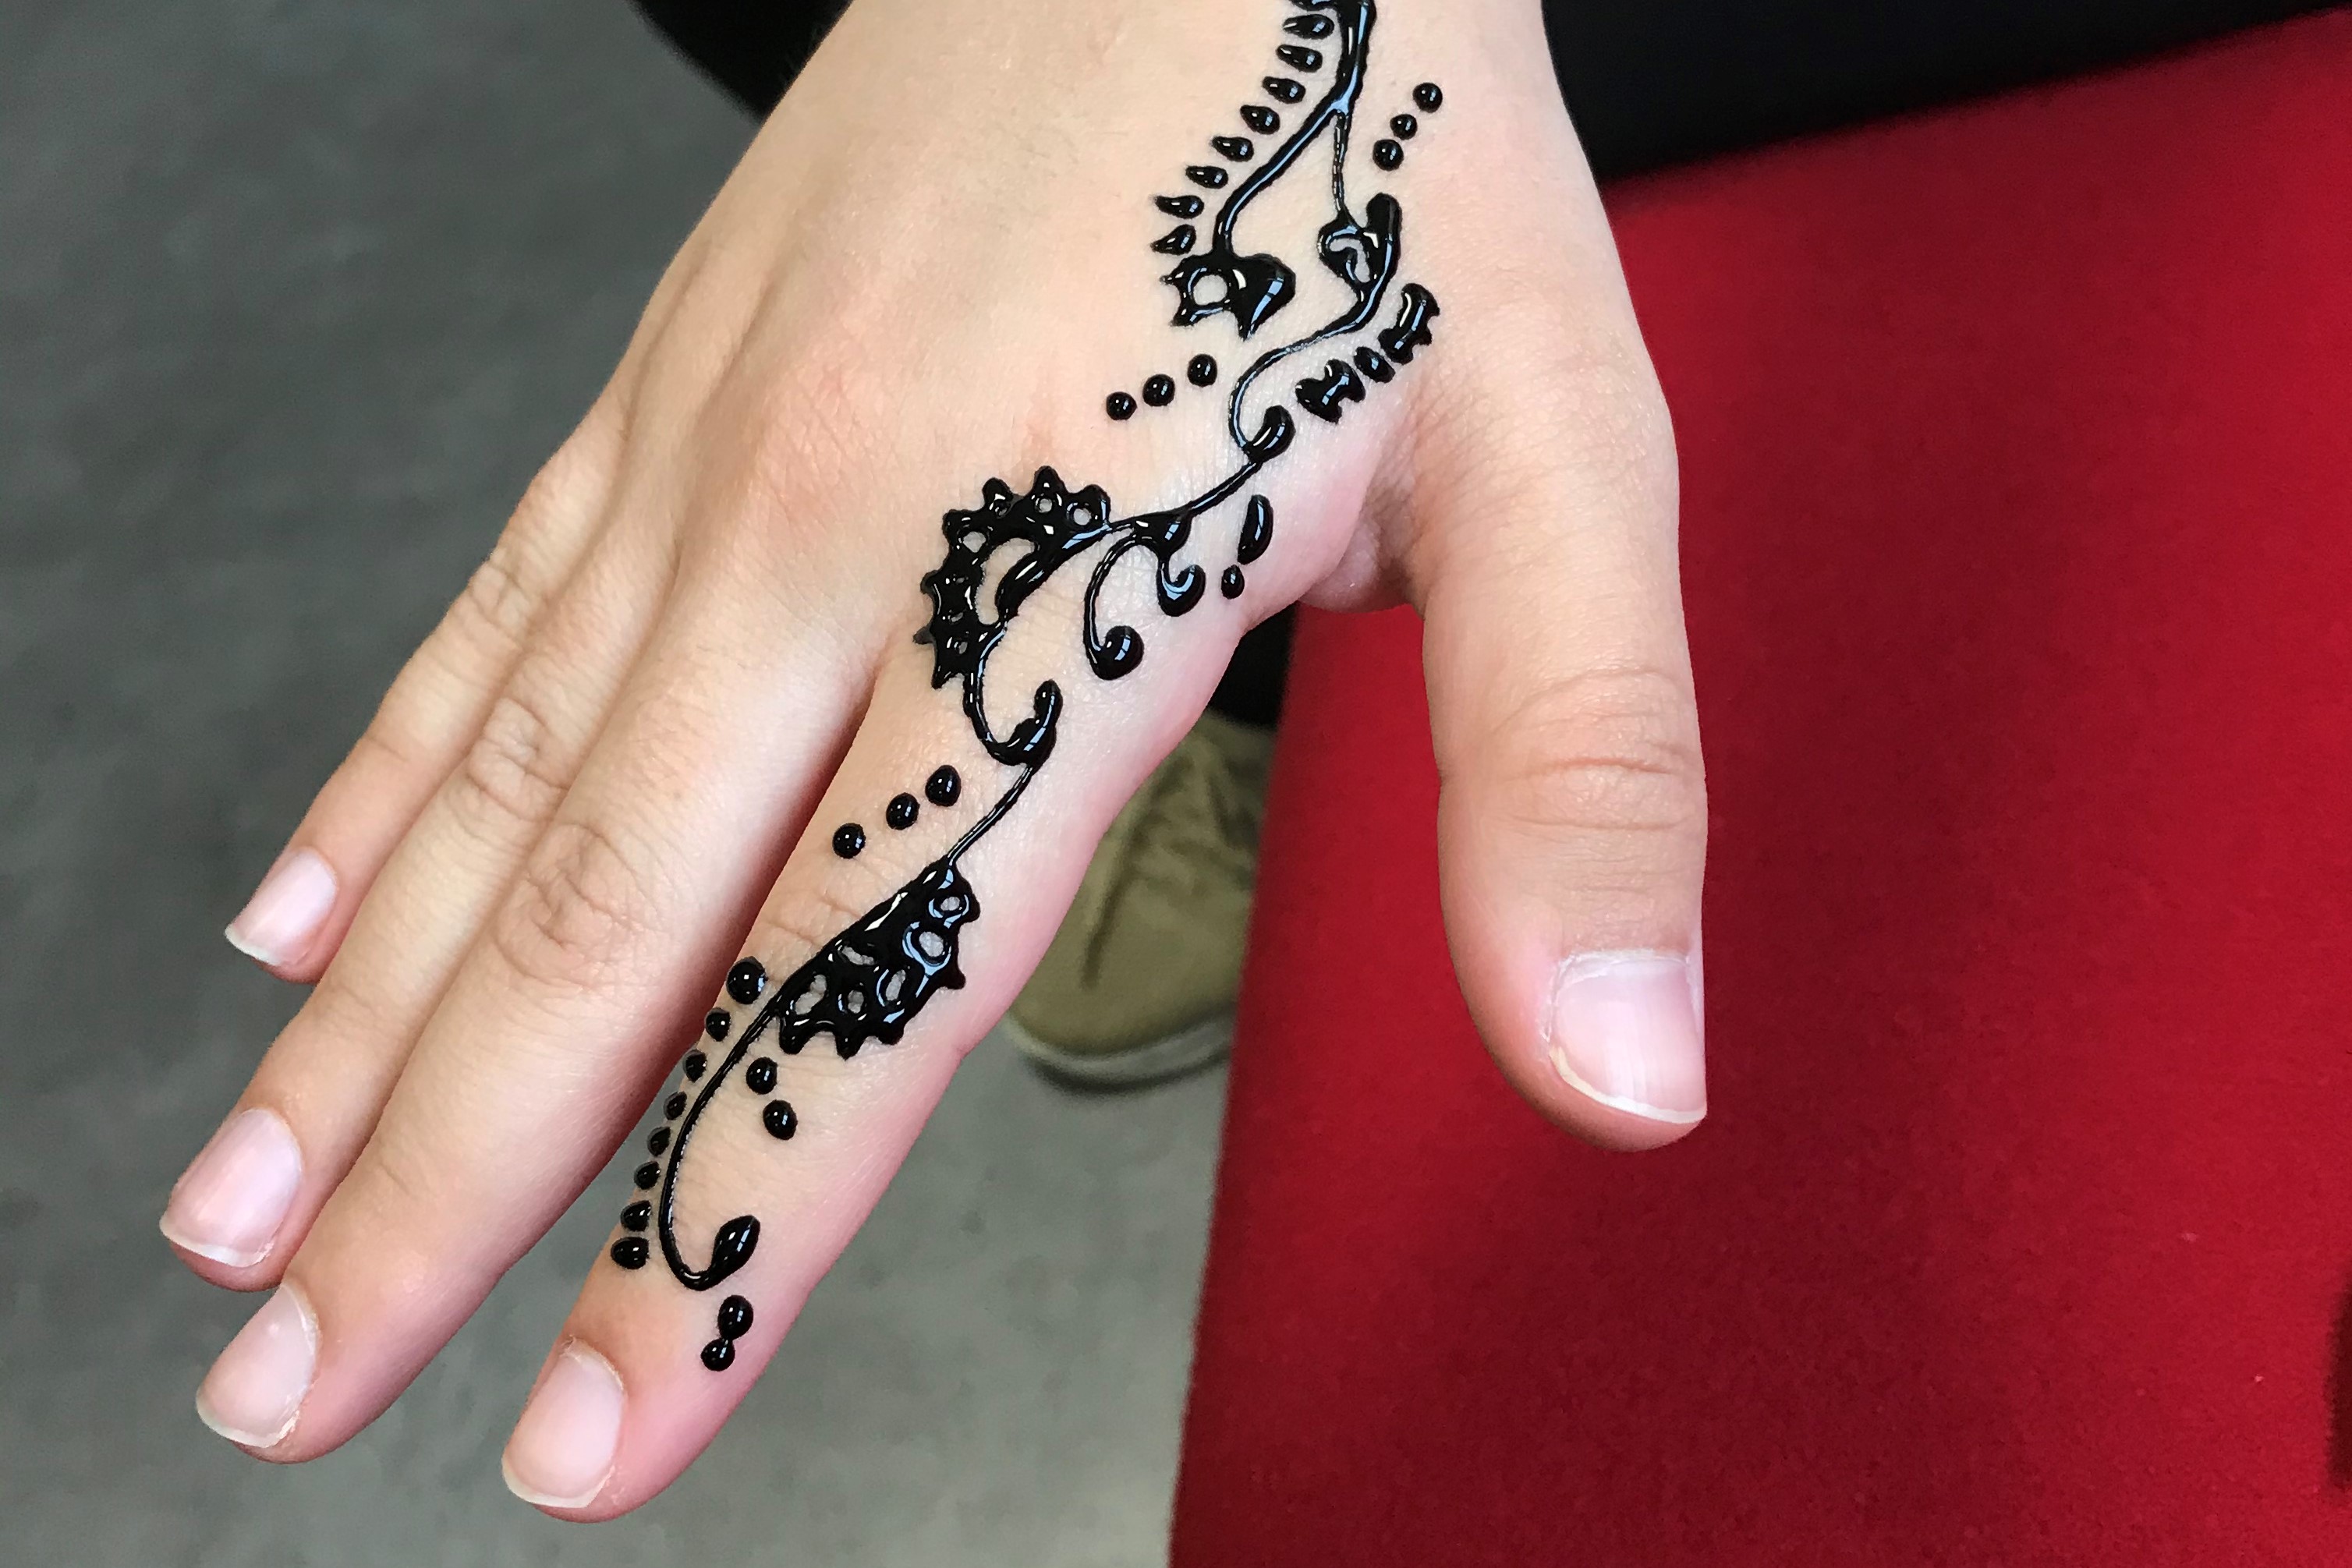 A student's hand featuring a Henna design